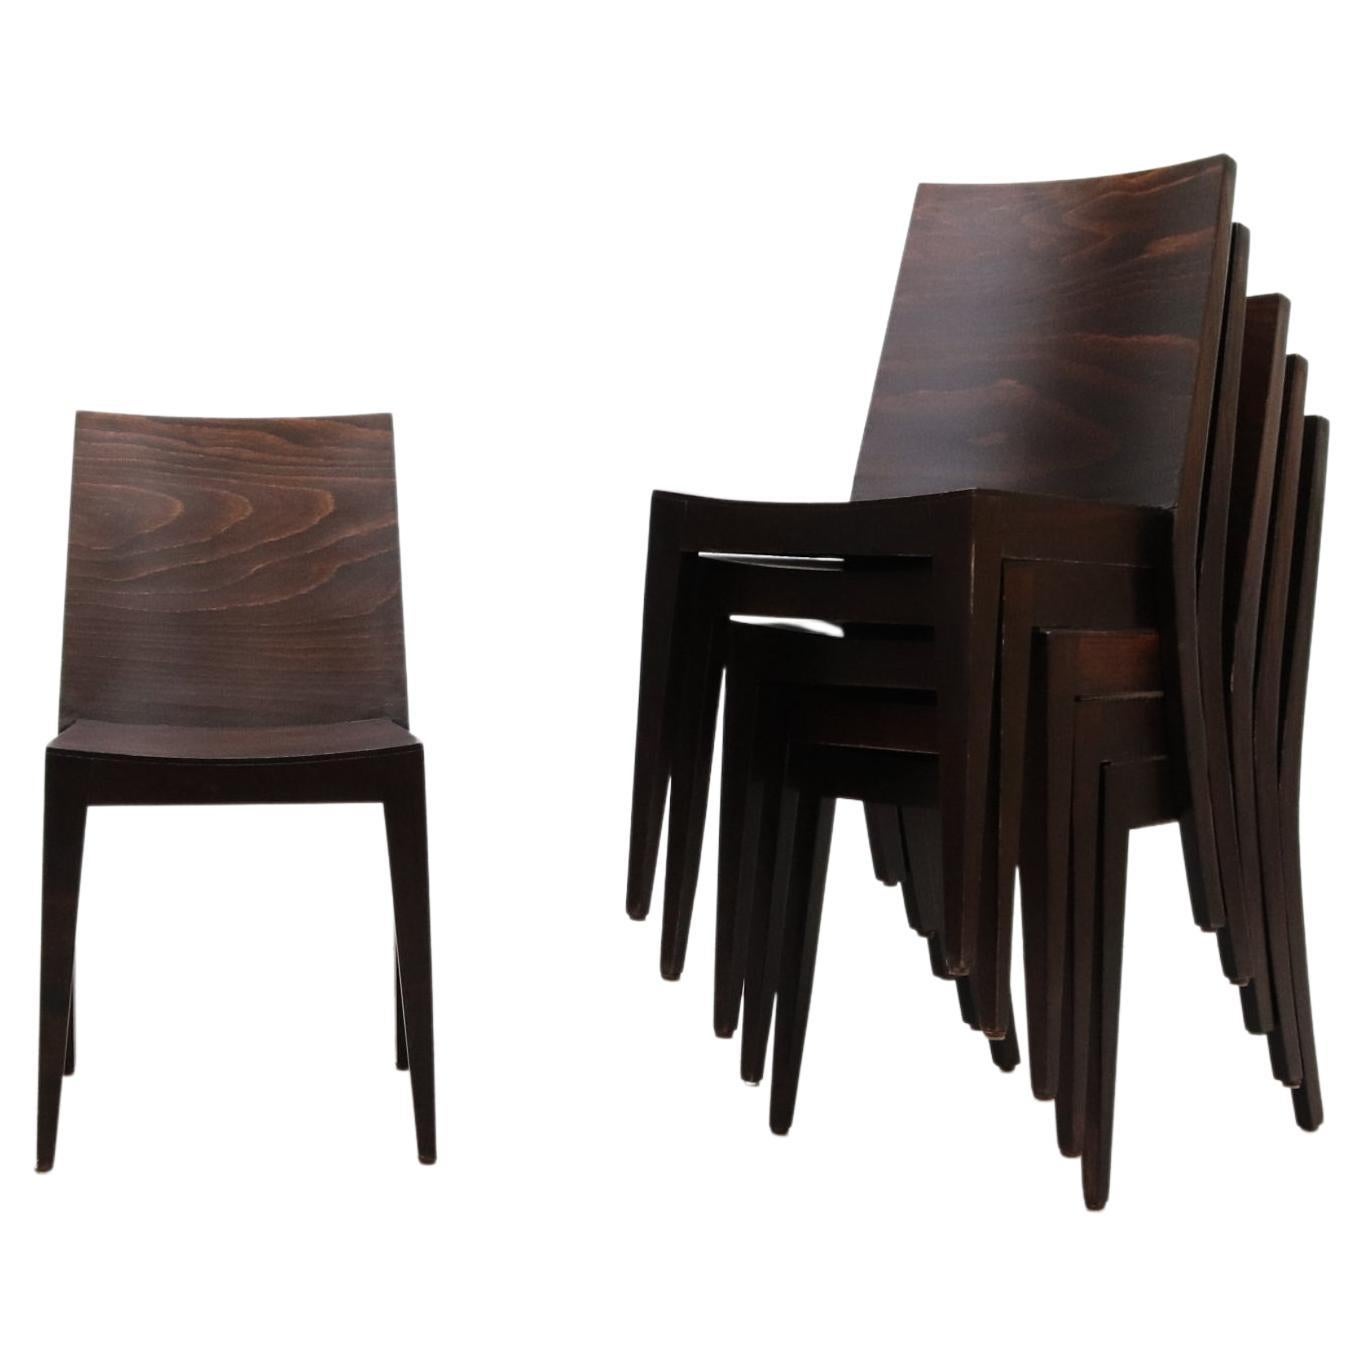 Modernist Philippe Starck Style Square Back Dark Stained Wood Stacking Chairs